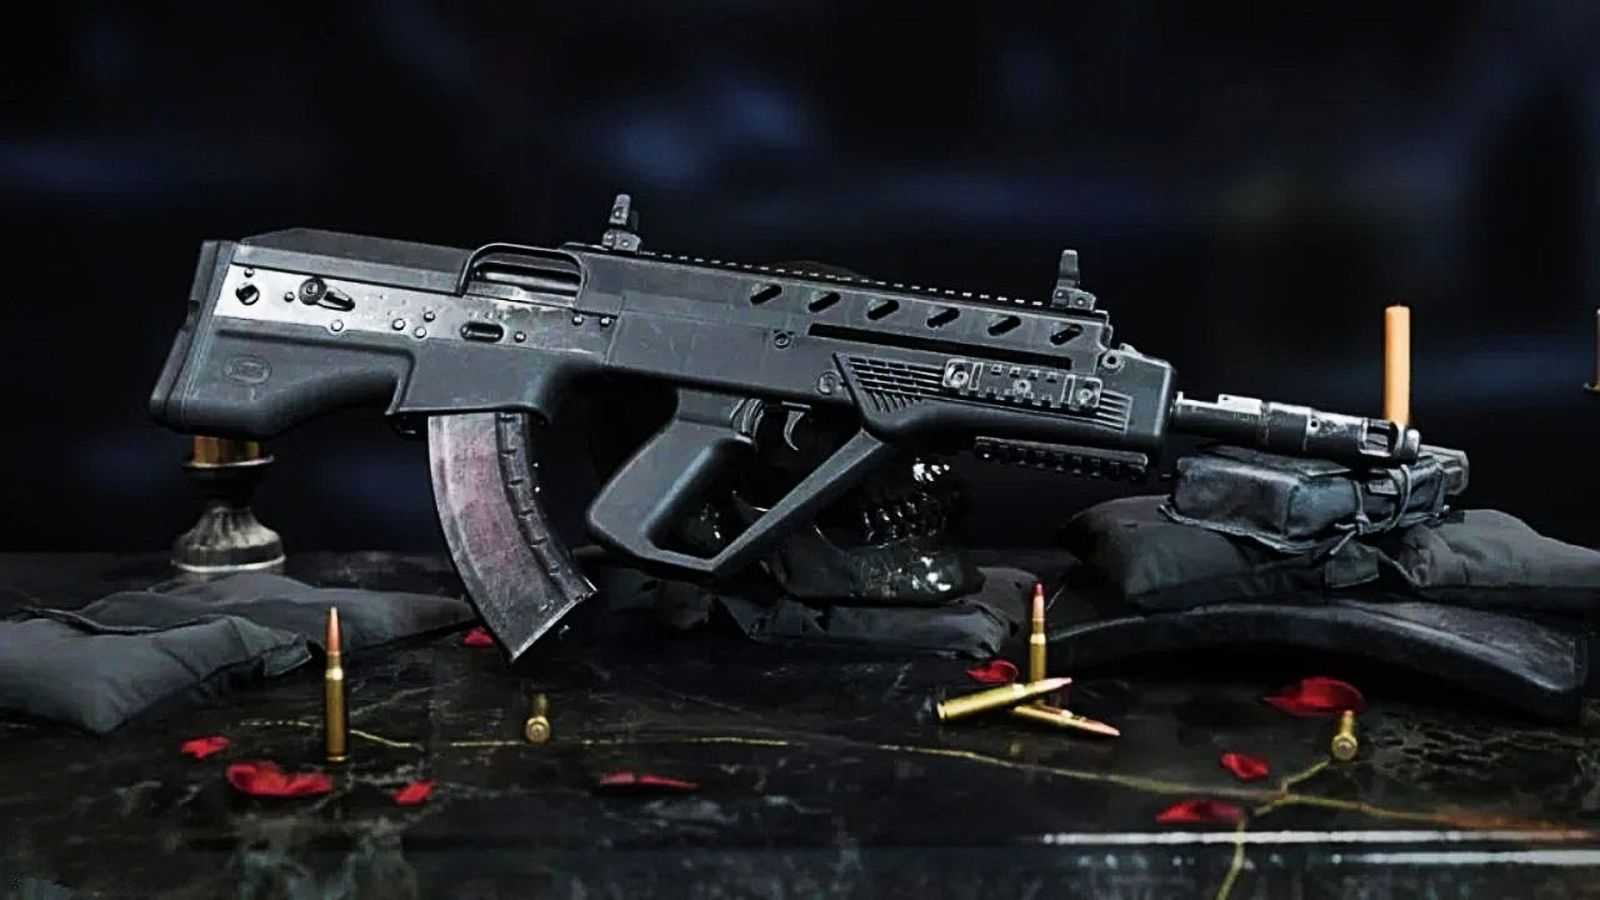 Modern Warfare 2 - inspected TR-76 Geist assault rifle surrounded by bullets